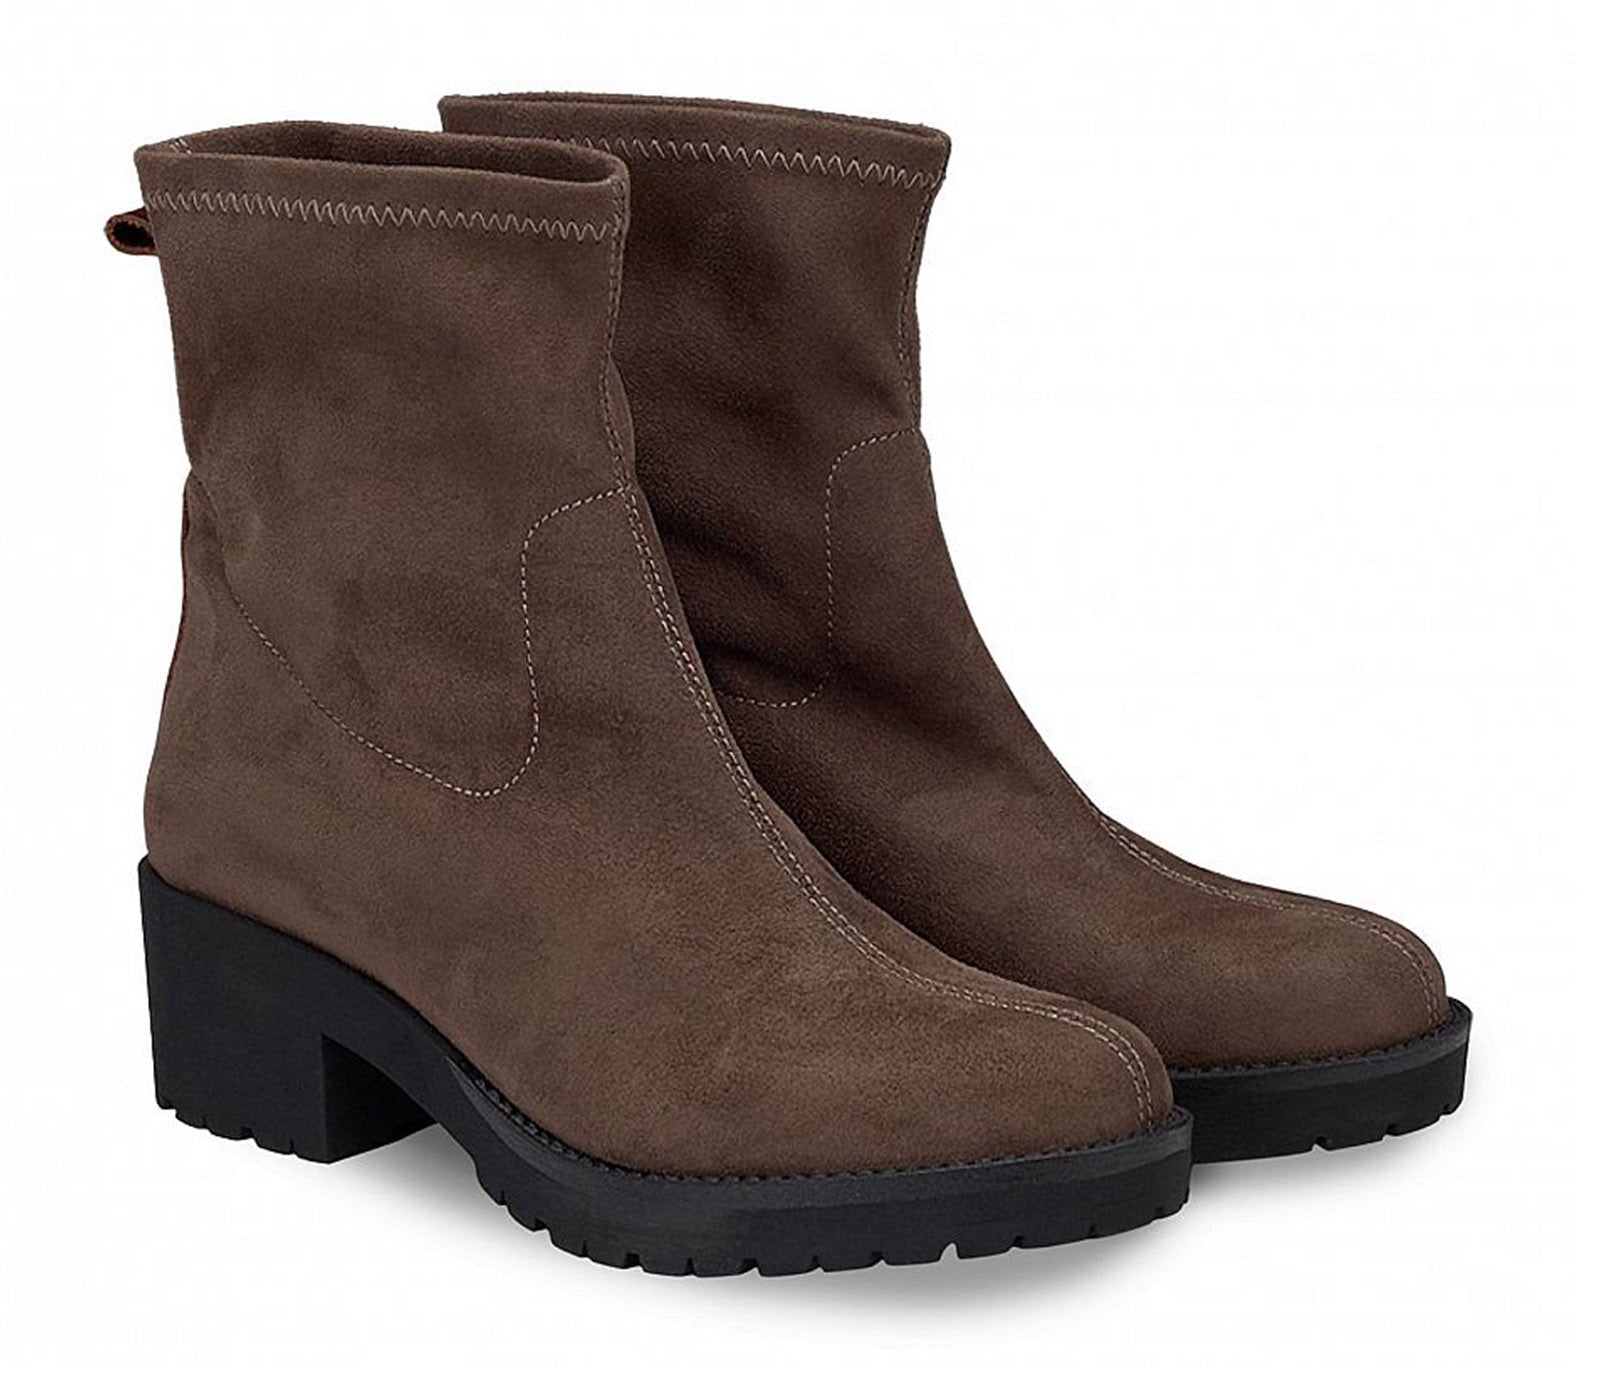 Women's Brown Suede Ankle Boots